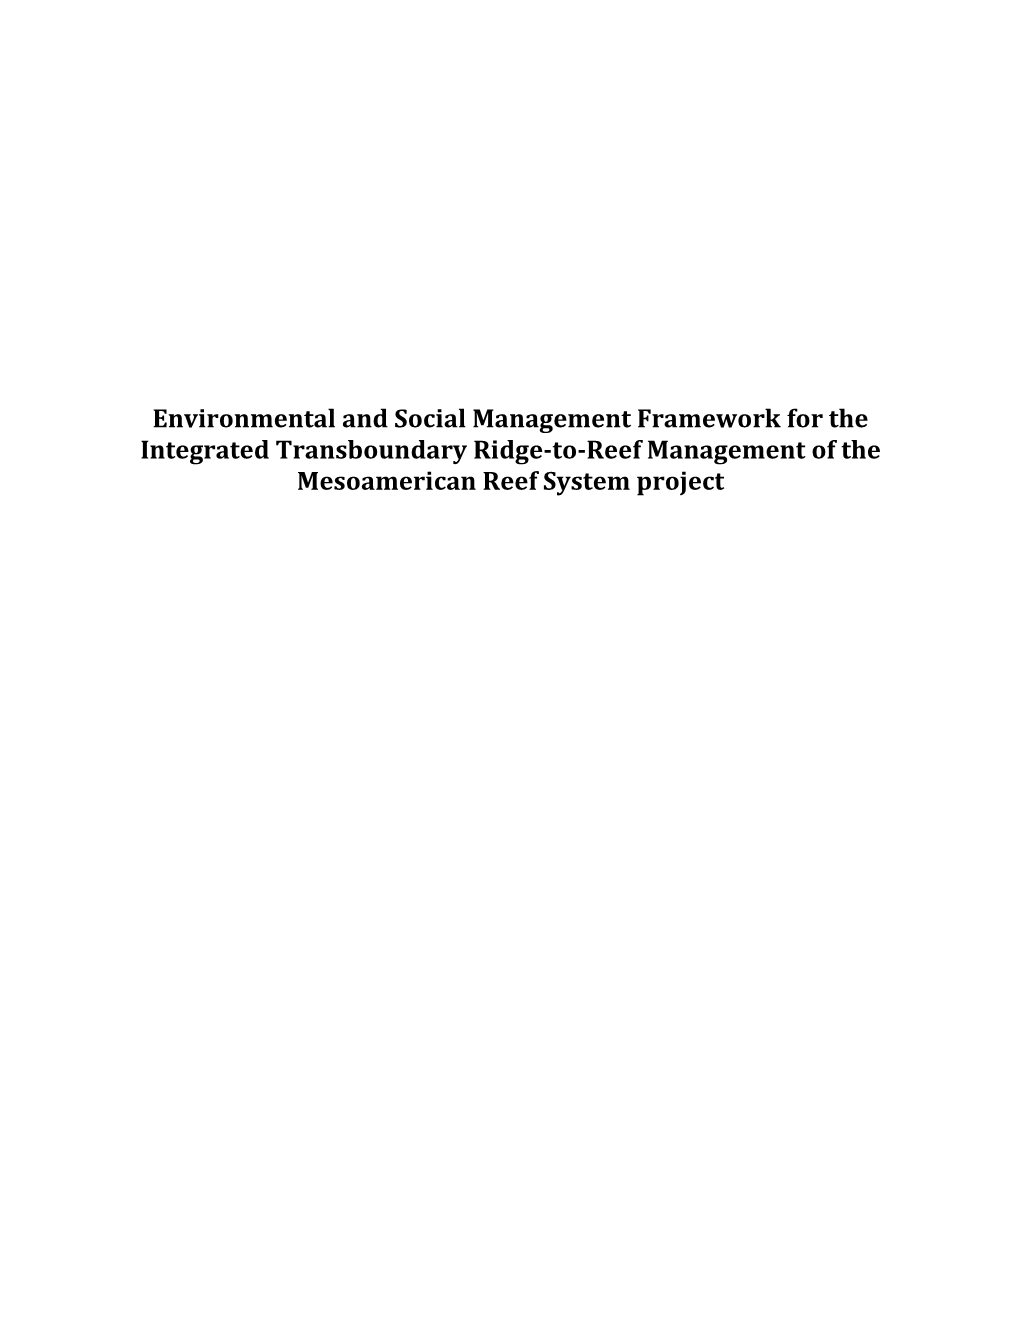 Environmental and Social Management Framework for the Integrated Transboundary Ridge-To-Reef Management of the Mesoamerican Reef System Project